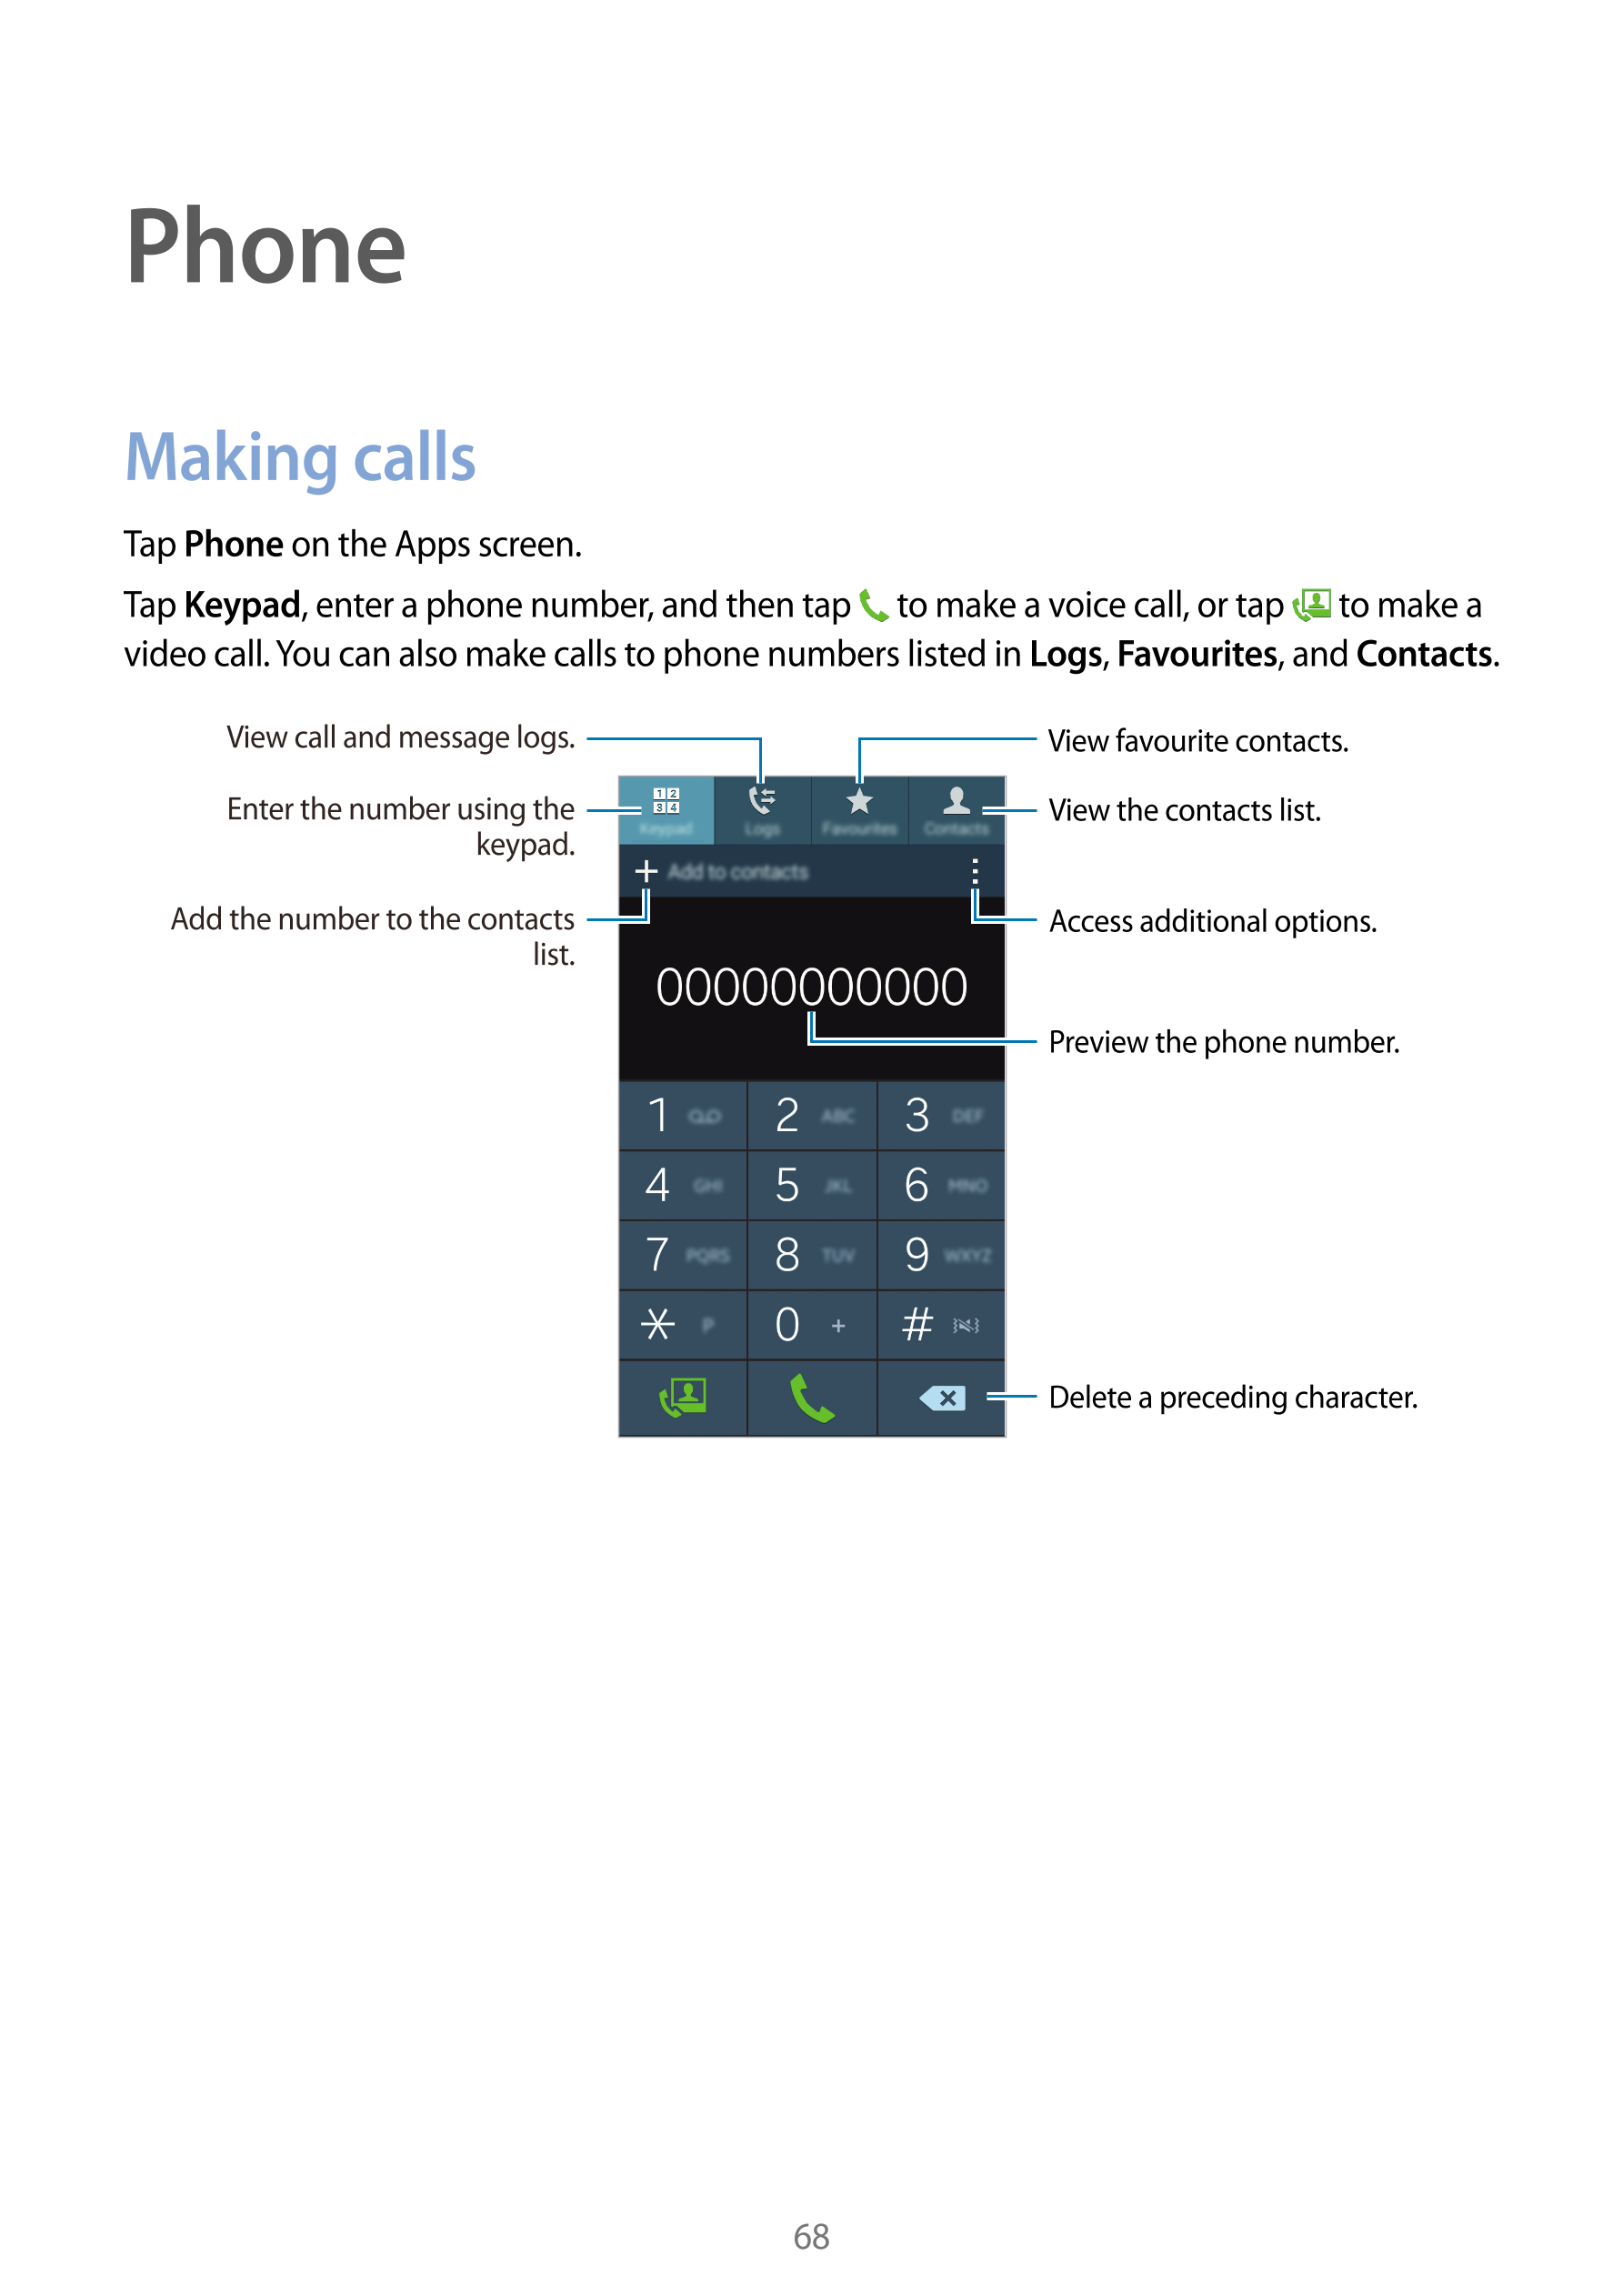 Phone
Making calls
Tap  Phone on the Apps screen.
Tap  Keypad, enter a phone number, and then tap   to make a voice call, or tap